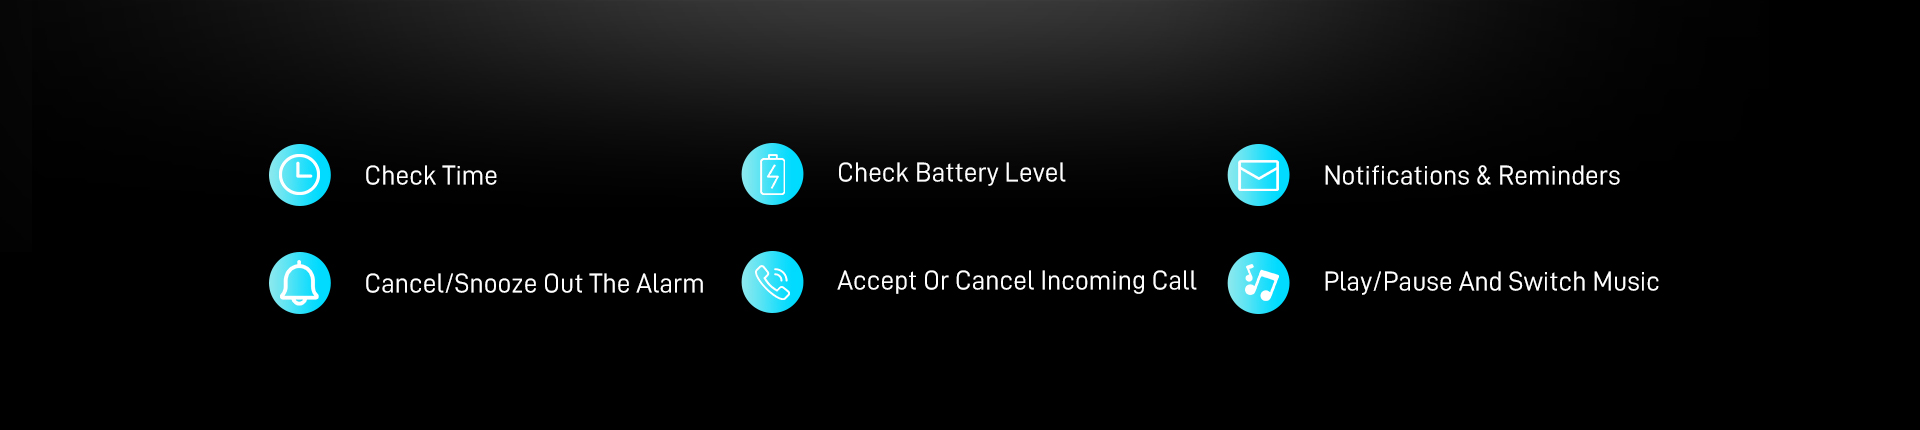 Rear mini display allows you to check time, accept/ cancel calls & play/pause/switch music | Doogee V20 